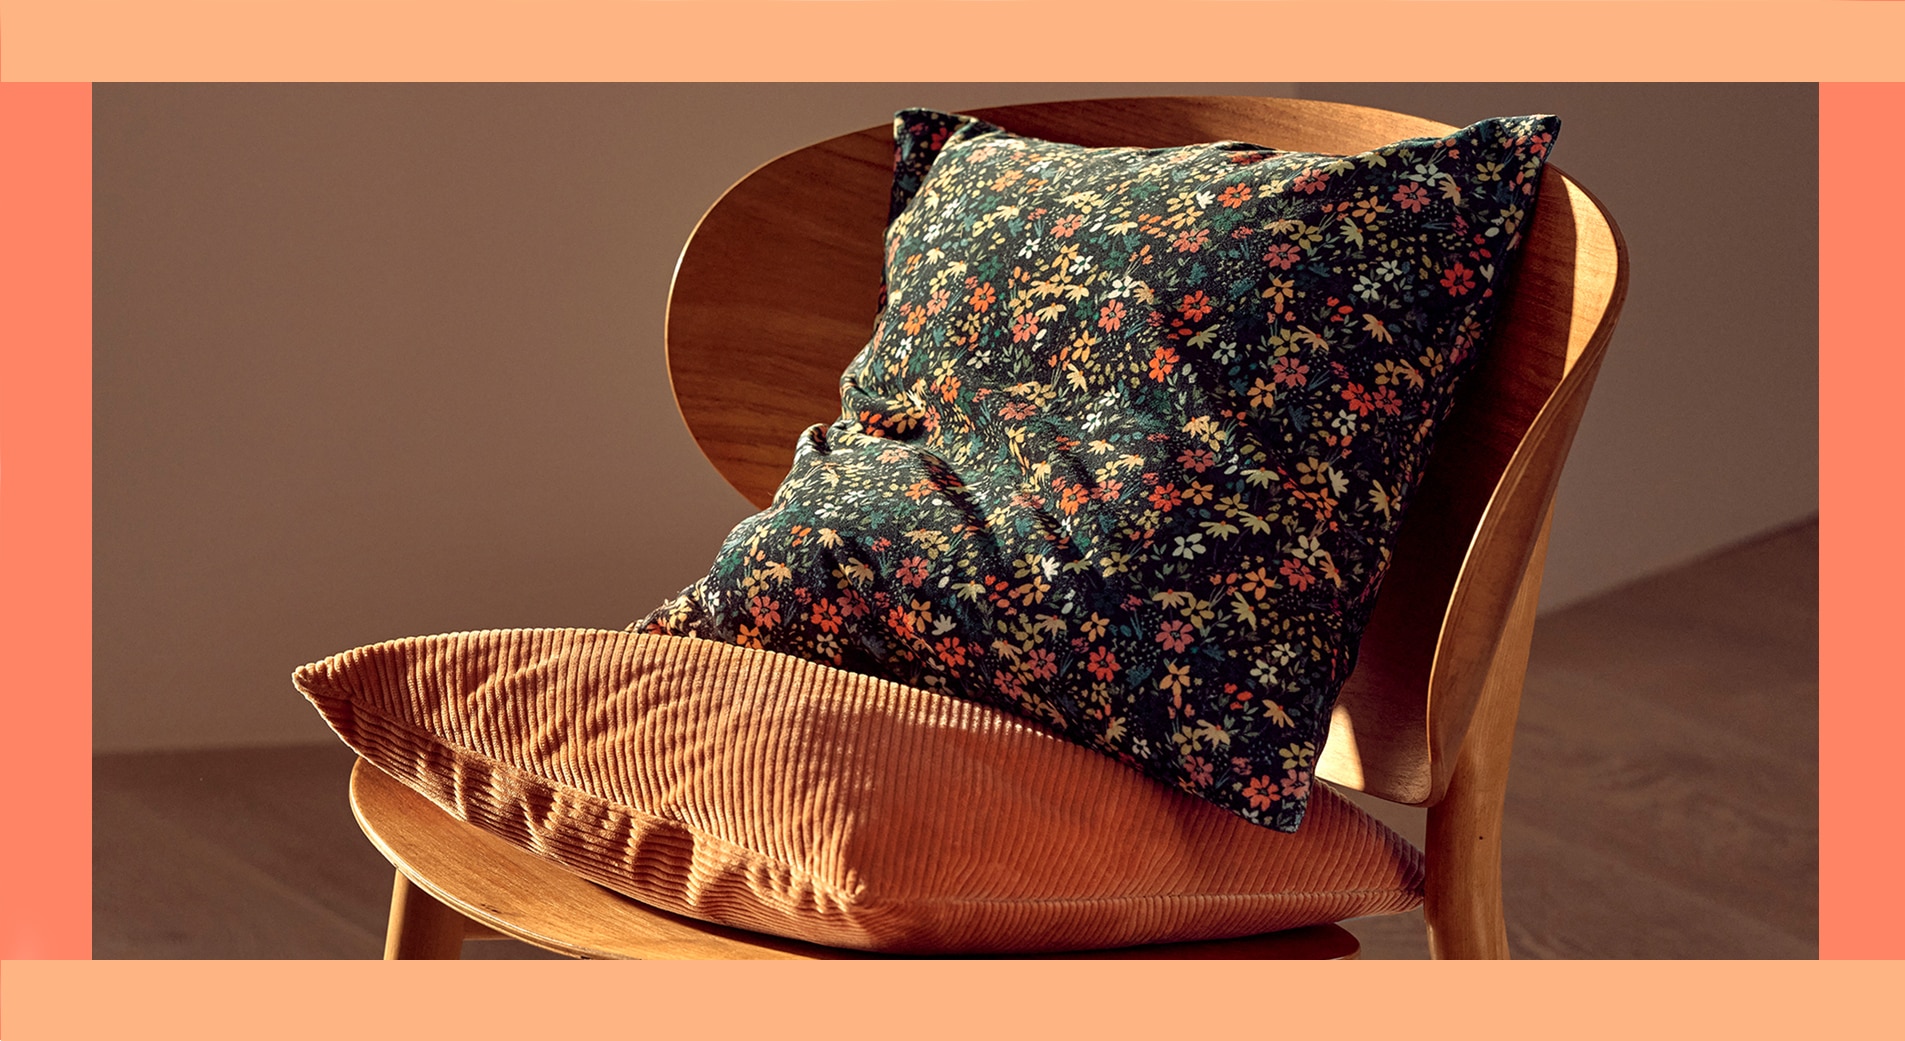 modern 70s style interior design, orange corduroy cushion and velvet floral cushion sit on wooden chair with curved back.